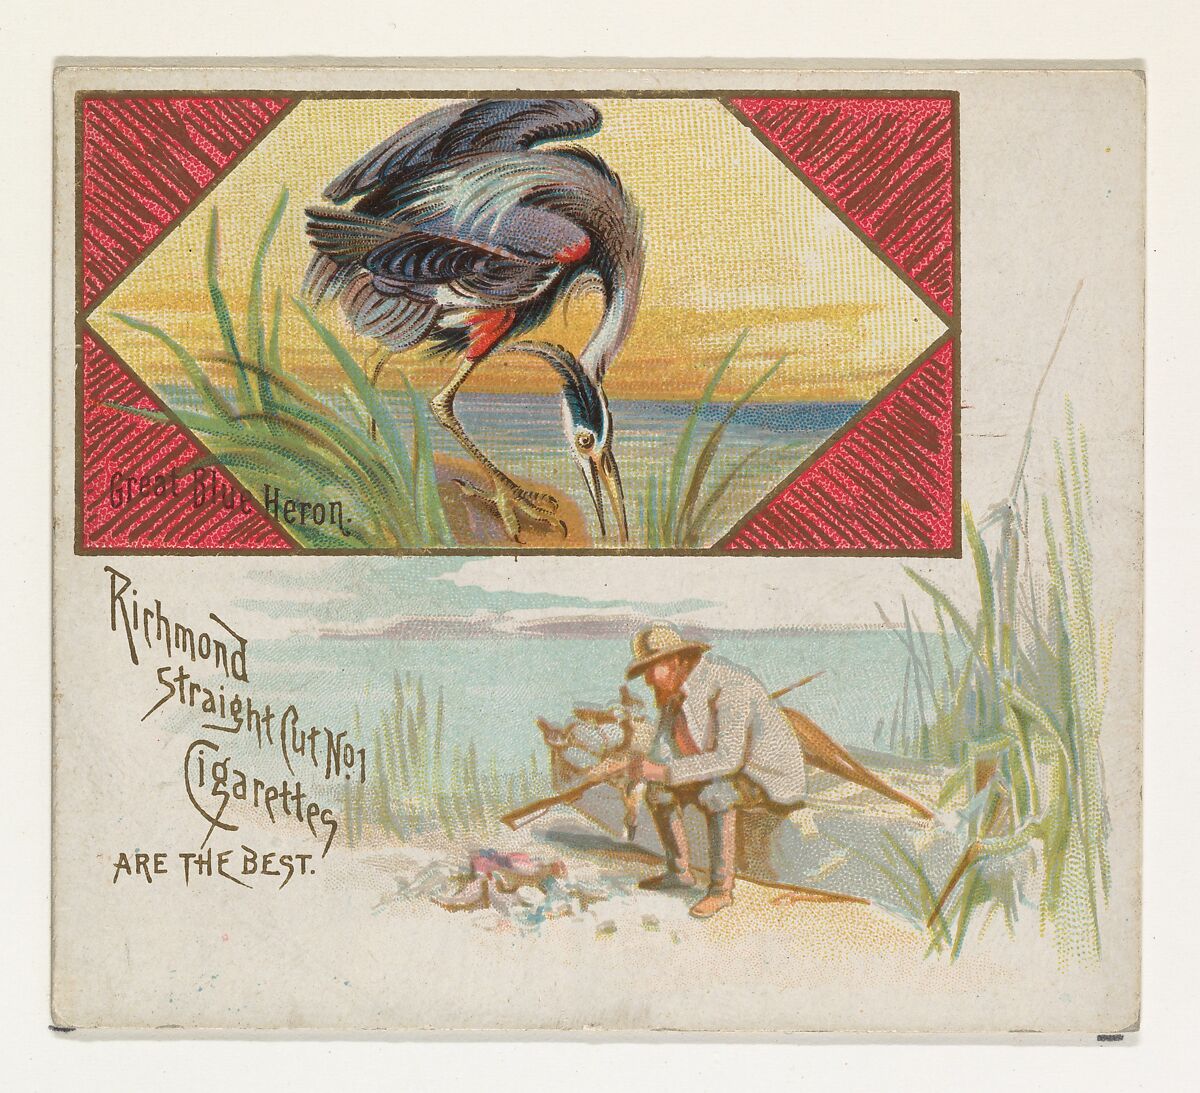 Great Blue Heron, from the Game Birds series (N40) for Allen & Ginter Cigarettes, Issued by Allen &amp; Ginter (American, Richmond, Virginia), Commercial color lithograph 